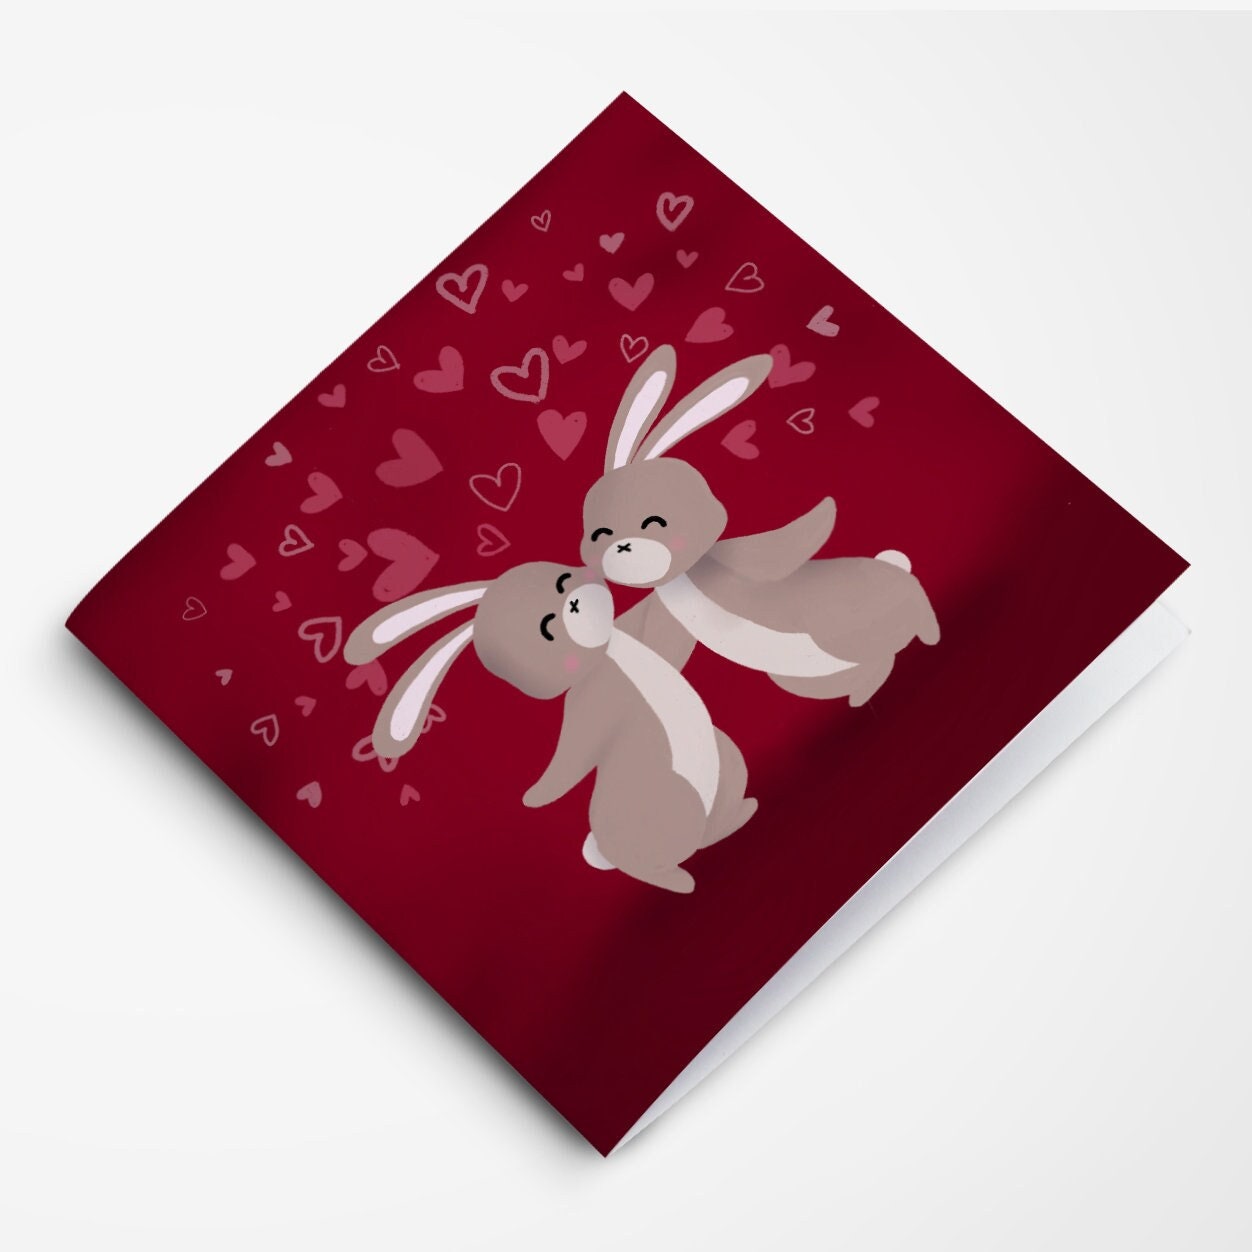 Valentines/Galentines Day Card - Bunny Love - Greeting Card, Greeting Cards/Postcards, Greeting & Note Cards